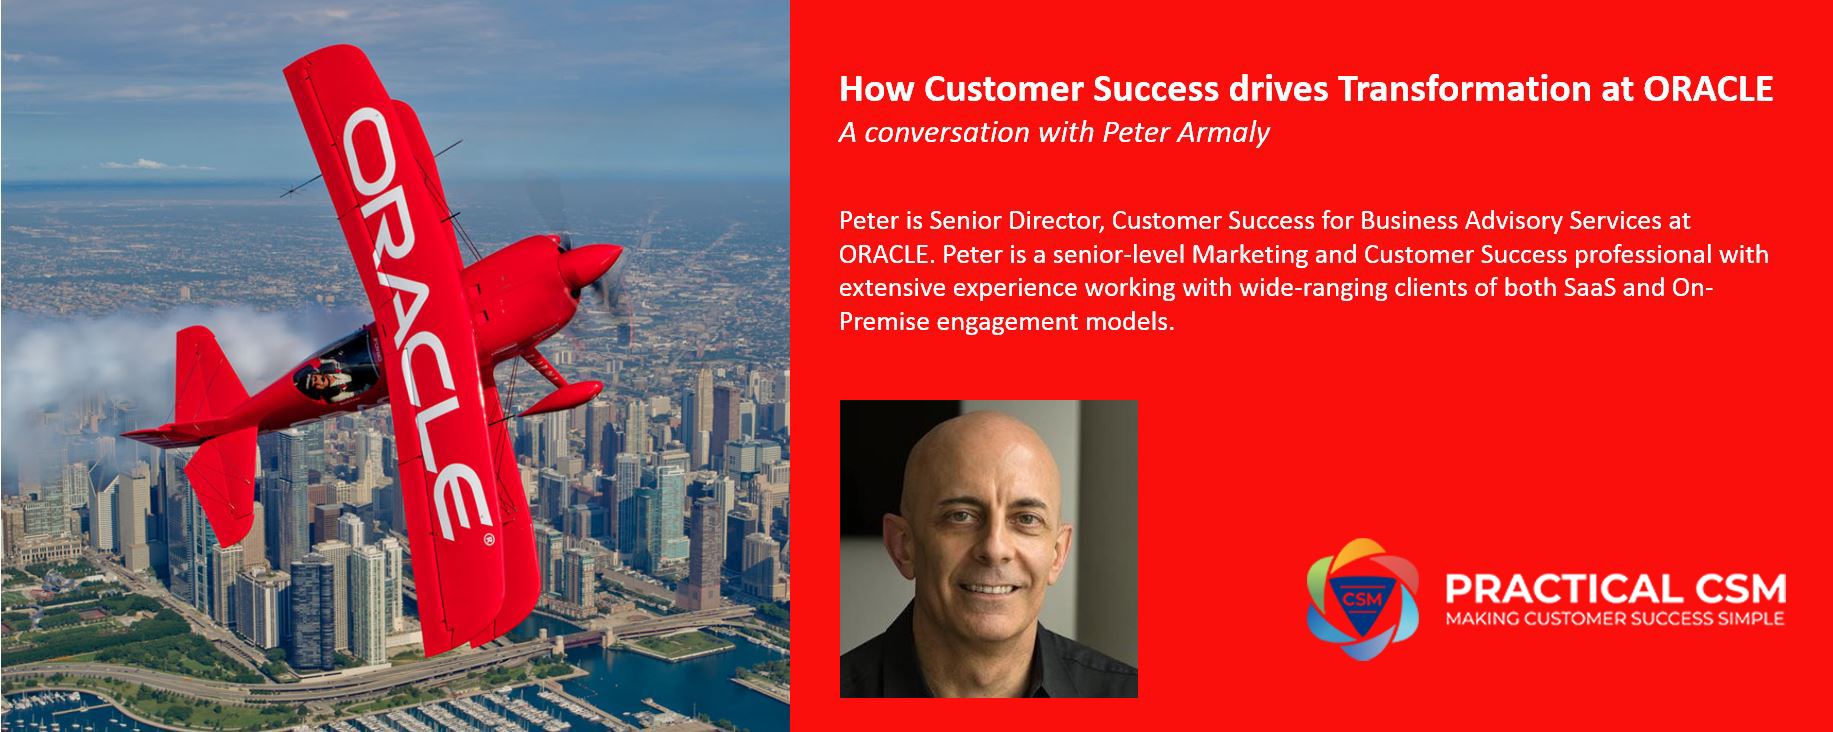 How Customer Success drives Transformation at ORACLE (Audio)- Practical CSM